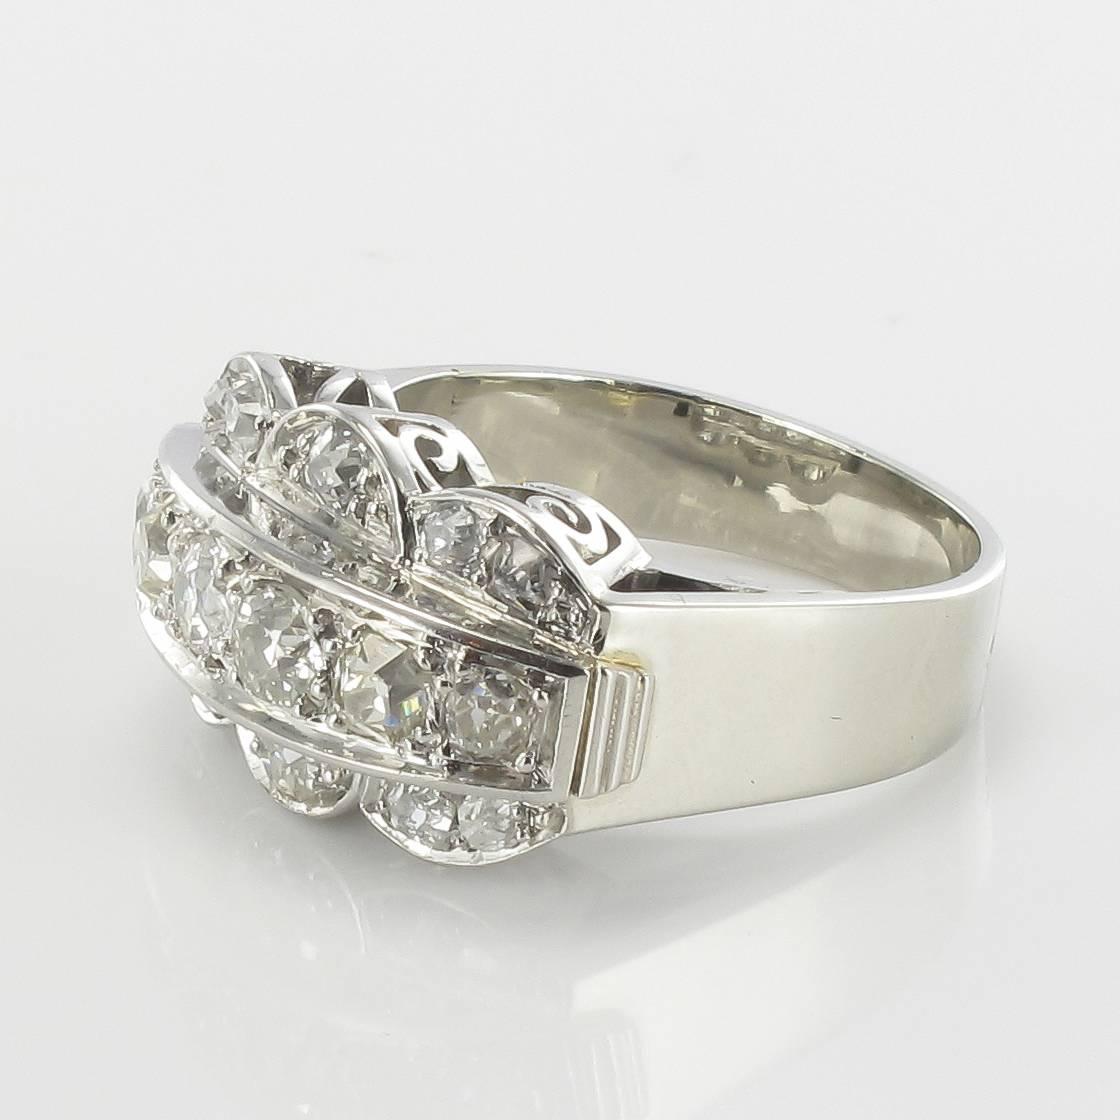 Ring in platinium and 18 carat white gold, dog and eagle heads hallmarks.

This splendid antique ring features a line of 5 antique brilliant cut diamonds surrounded by a wavy motif also set with 10 antique brilliant cut diamonds. The ring bed is